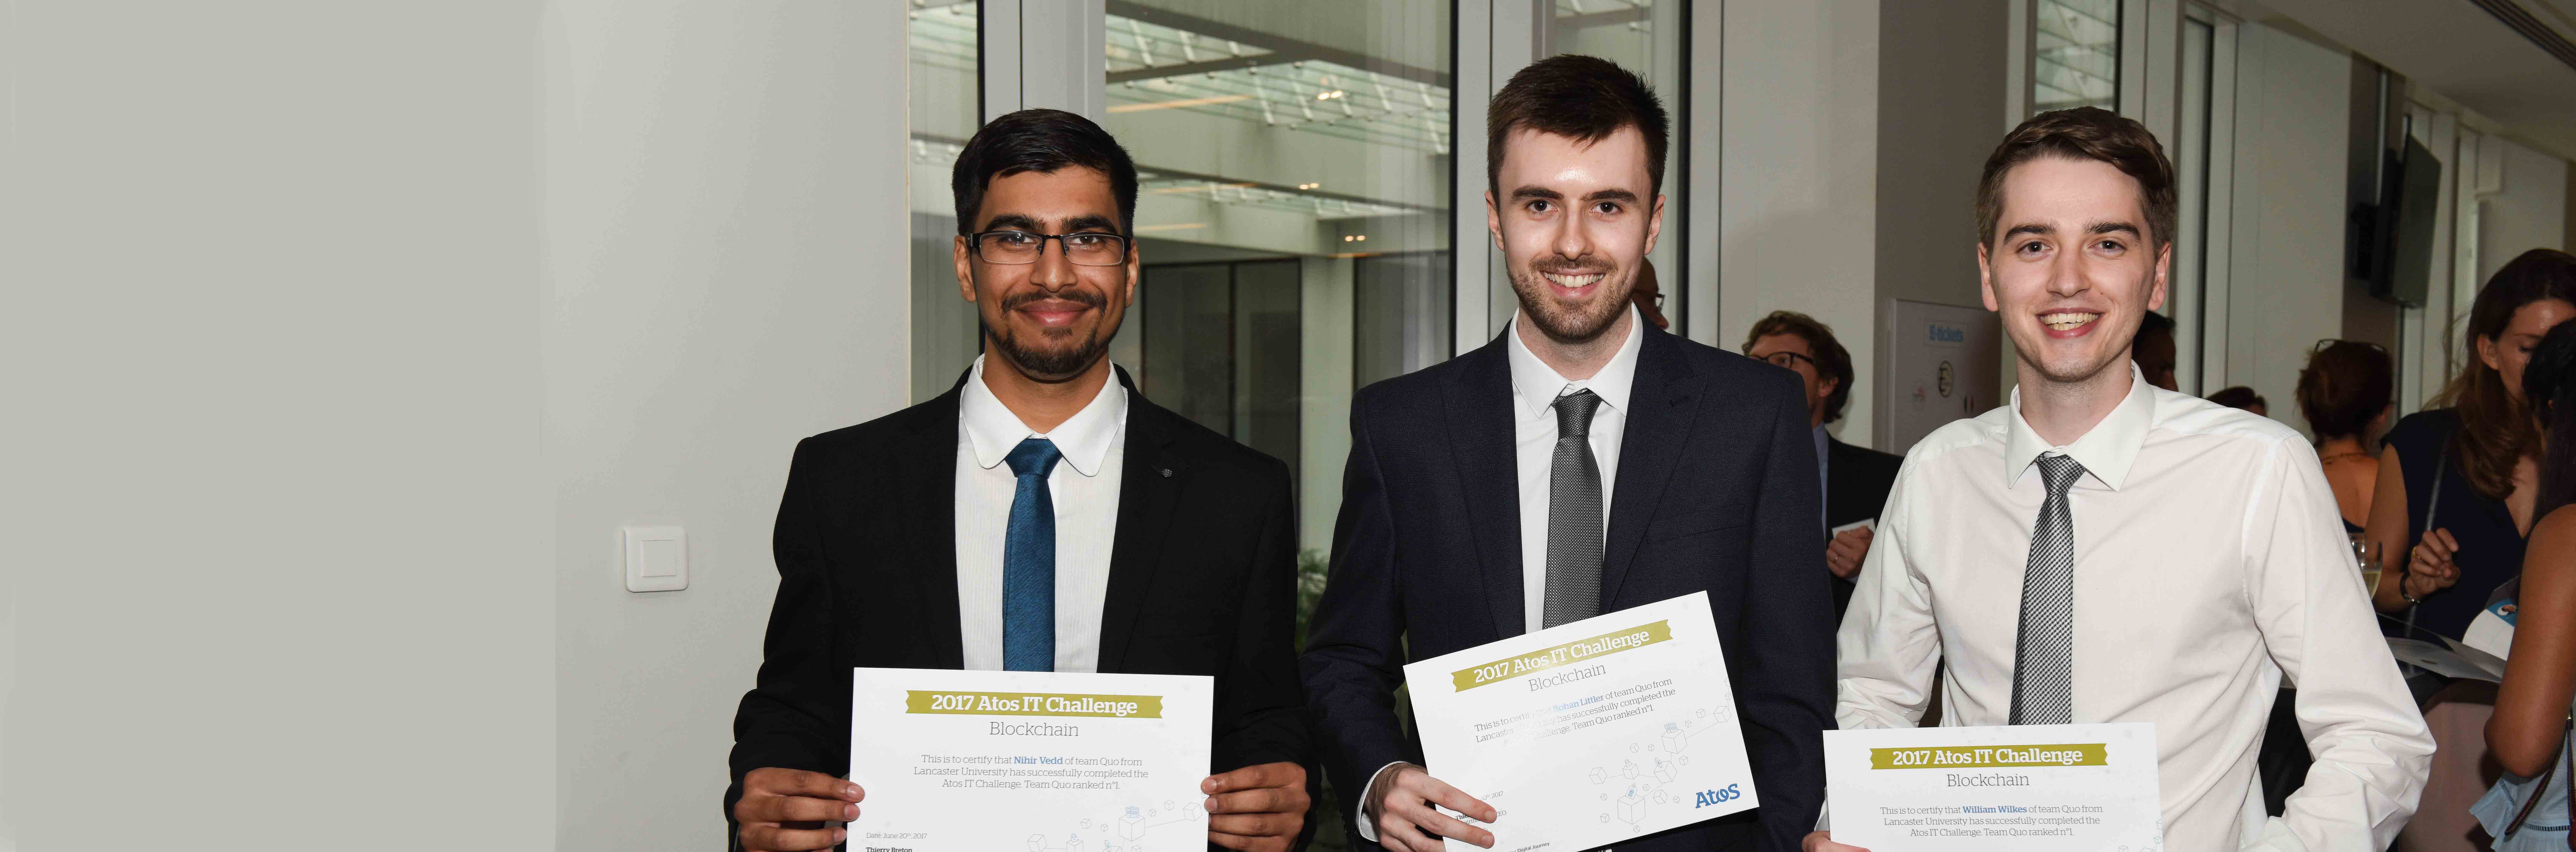 Nihir Vedd, Rohan Littler and William Wilkes, who won first place at the Atos IT Challenge 2017 